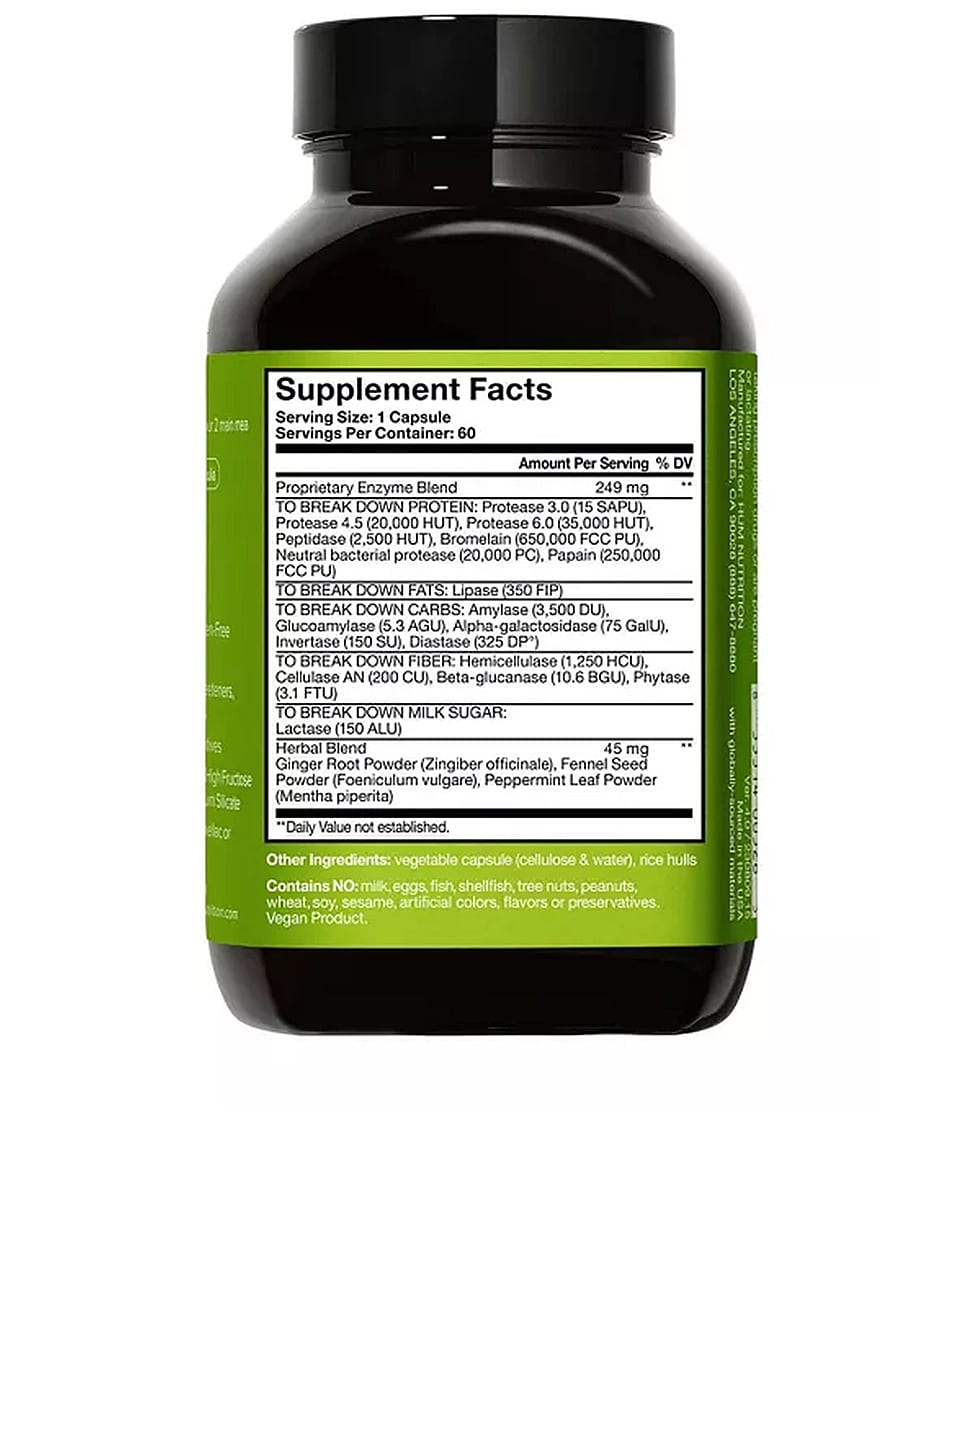 Shop Hum Nutrition Flatter Me Digestive Enzyme Supplement In N,a